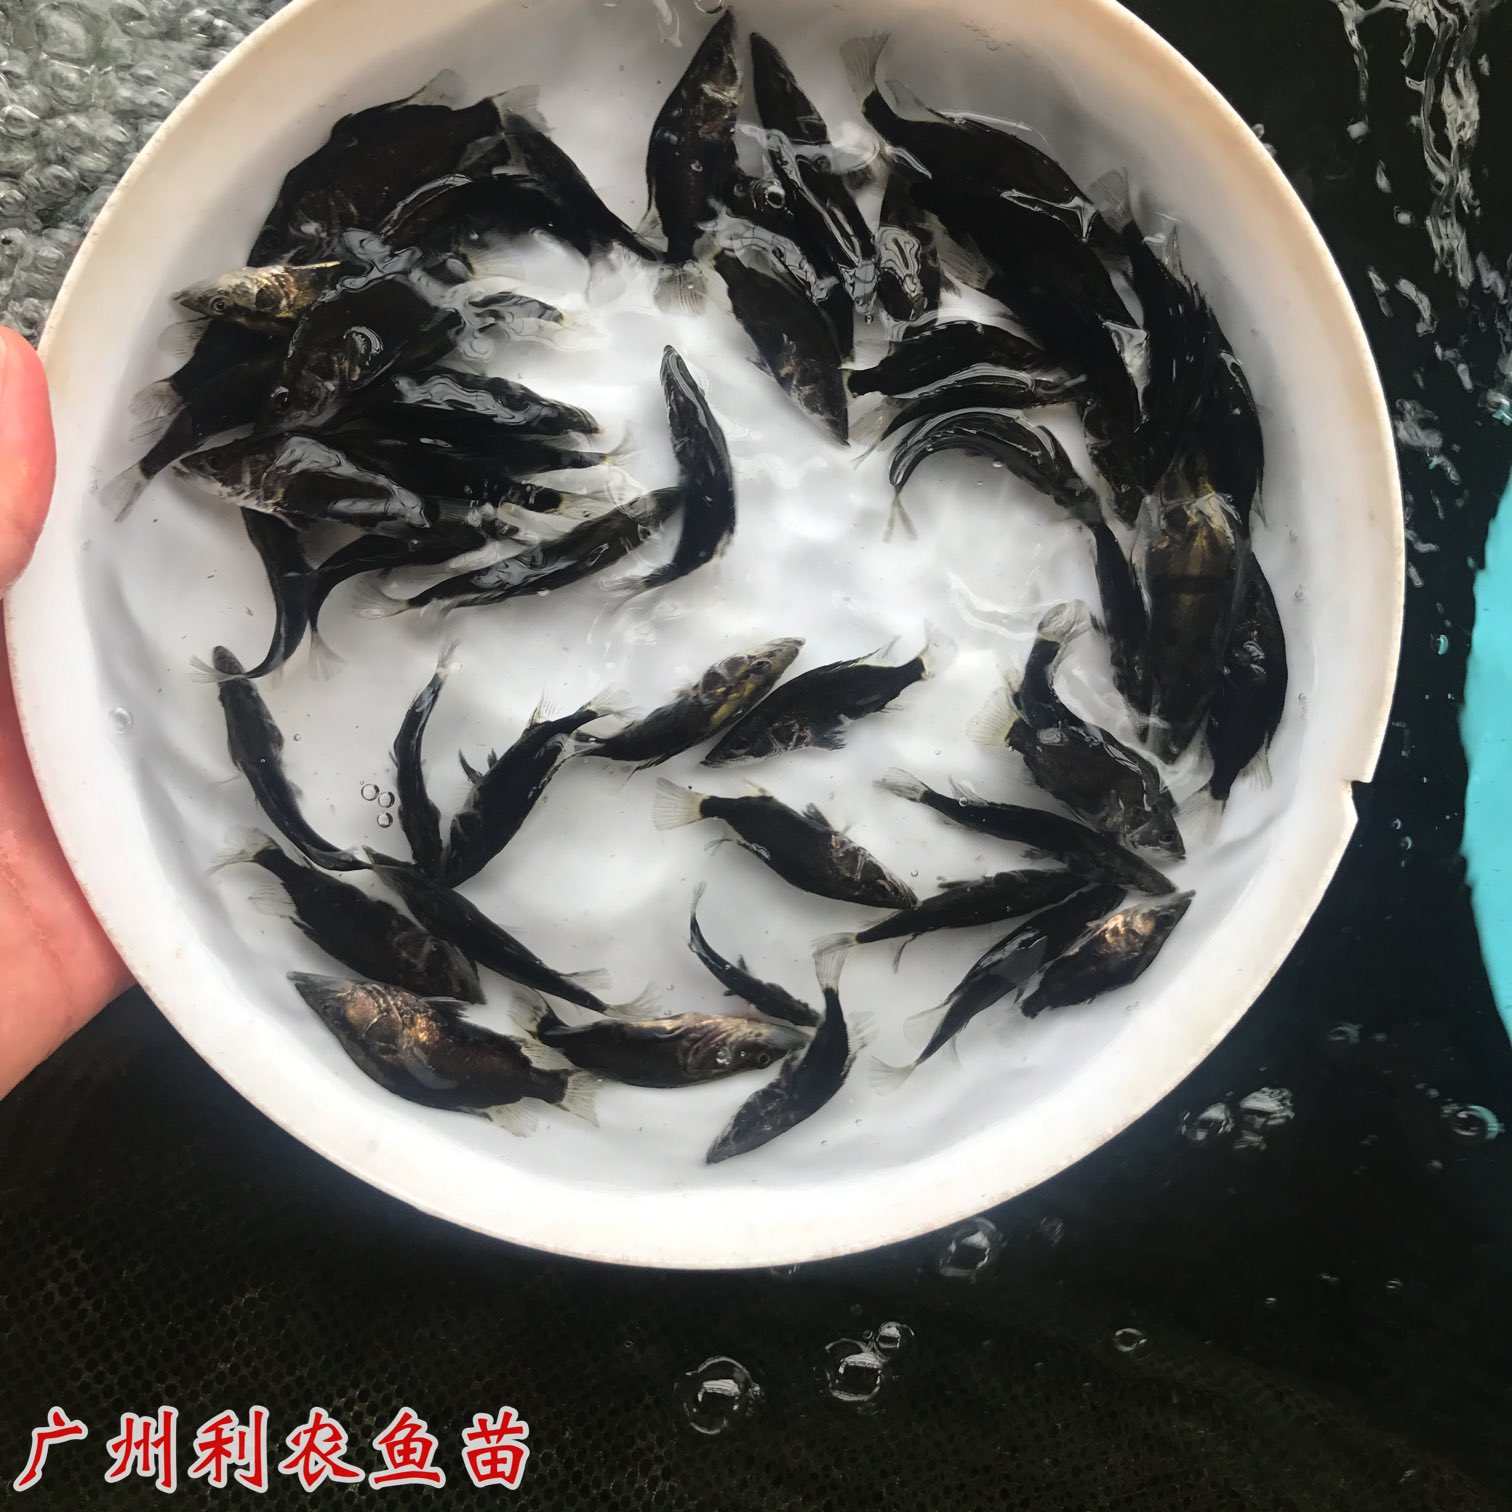 Wholesale feed for osmanthus fish fry. Siniperca chuatsi fry have good varieties, easy growth, and high yield. Source of the fry farm